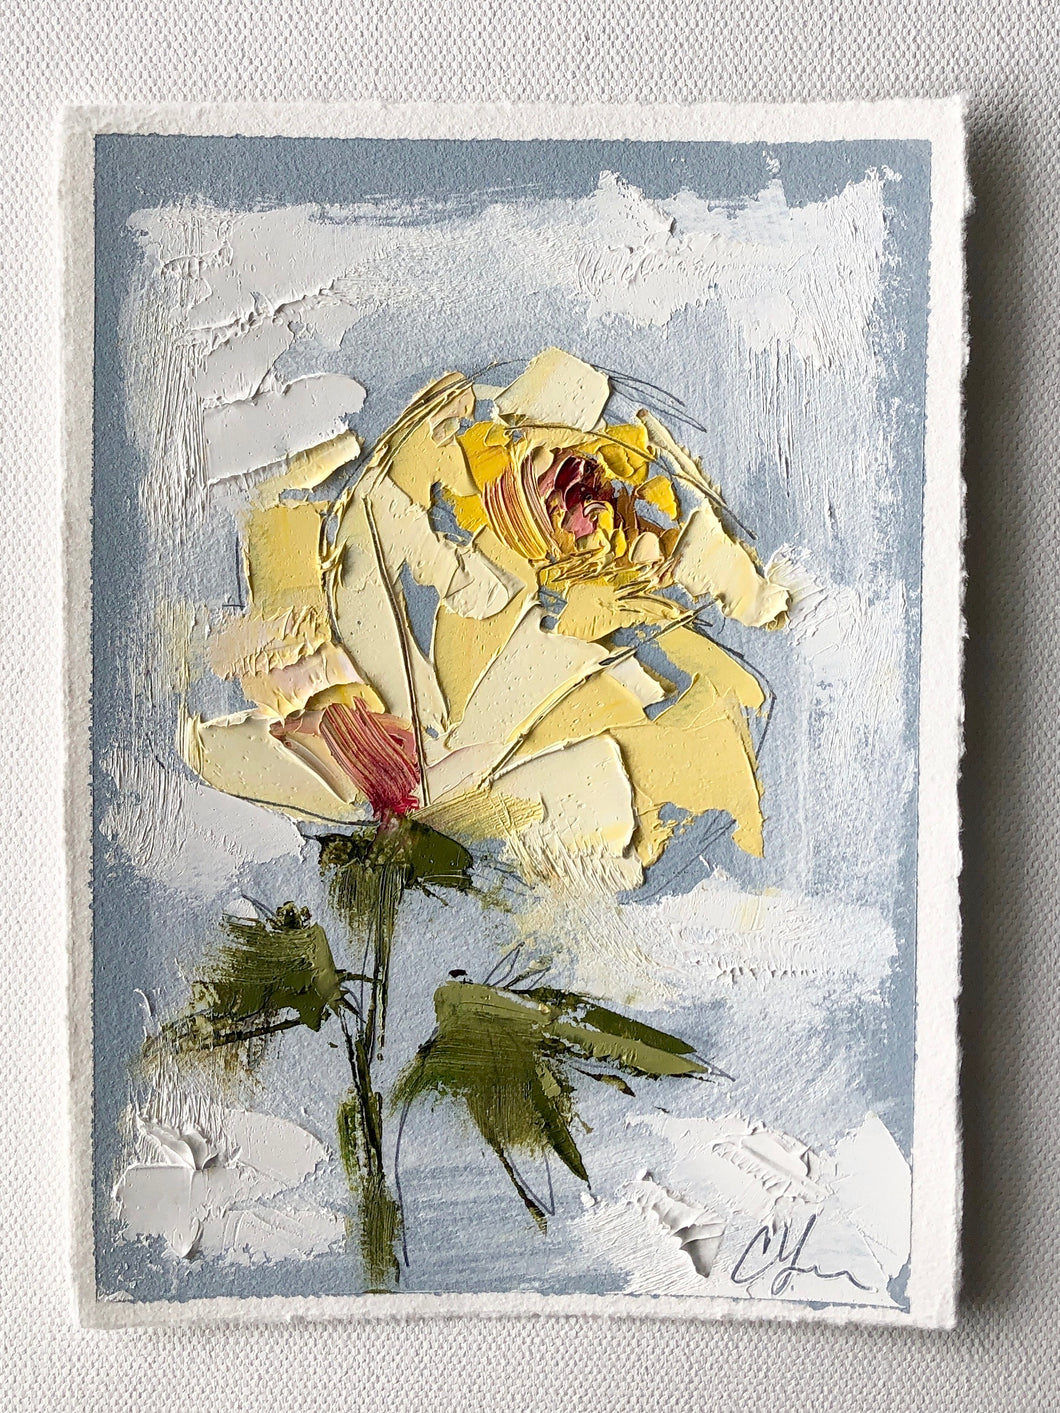 “Yellow on Blue III” 7x5” Oil/Graphite on Paper